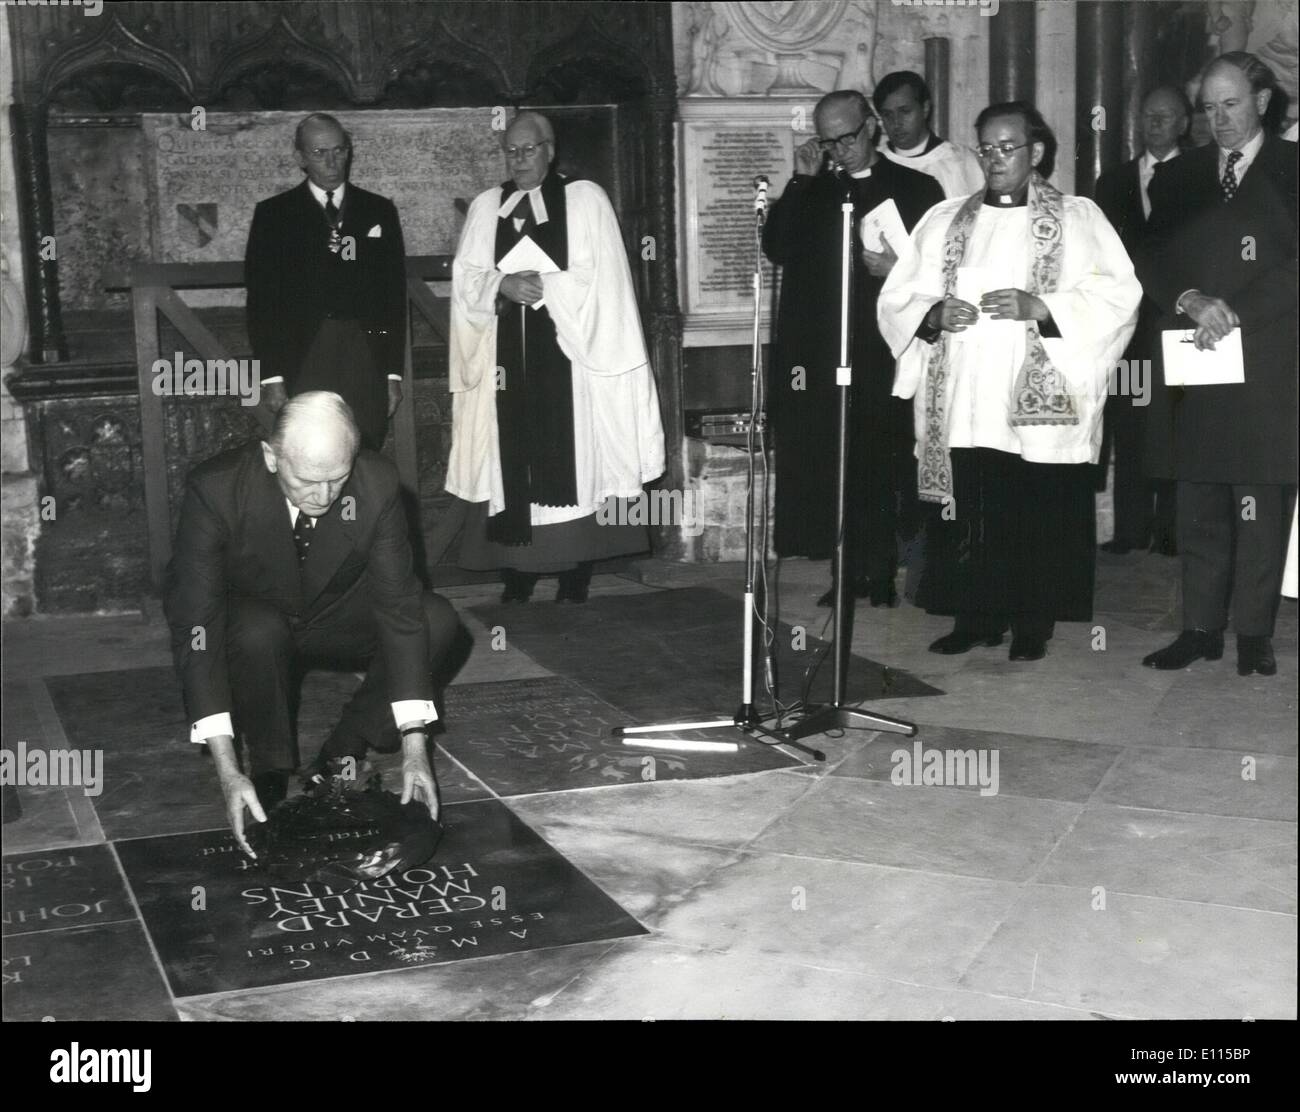 Dec. 12, 1975 - The Duke of Norfolk Unveils Memorial to Jesuit Poet in Westminster Abbey: The Duke of Norfolk, leading Roman Catholic Layman, today unveiled a memorial in Poet's Corner in Westminster Abbey to Gerard Manley Hopkins, the poet and Jesuit priest who died in 1889. This is the first time that a Roman Catholic poet has been memorialised in the Abbey since Dryden, Poet Laureate to Charles II and James II Photo shows: The Duke of Norfolk (extreme right) looks on as Mr. L Stock Photo